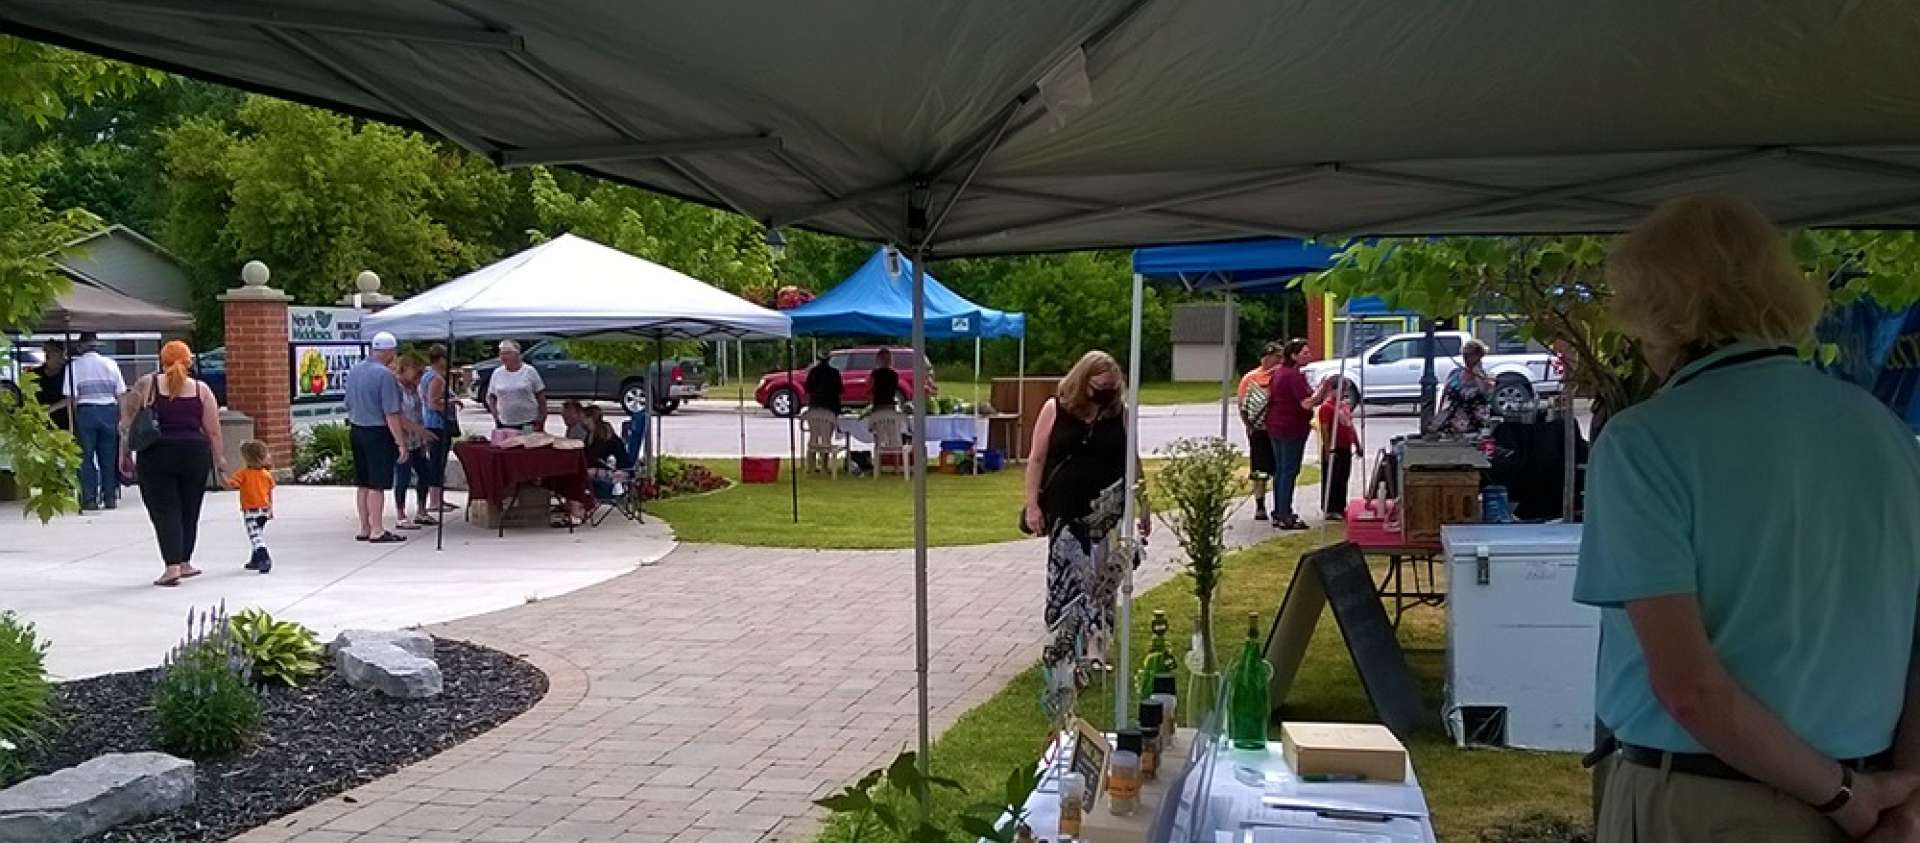 north middlesex farmers market